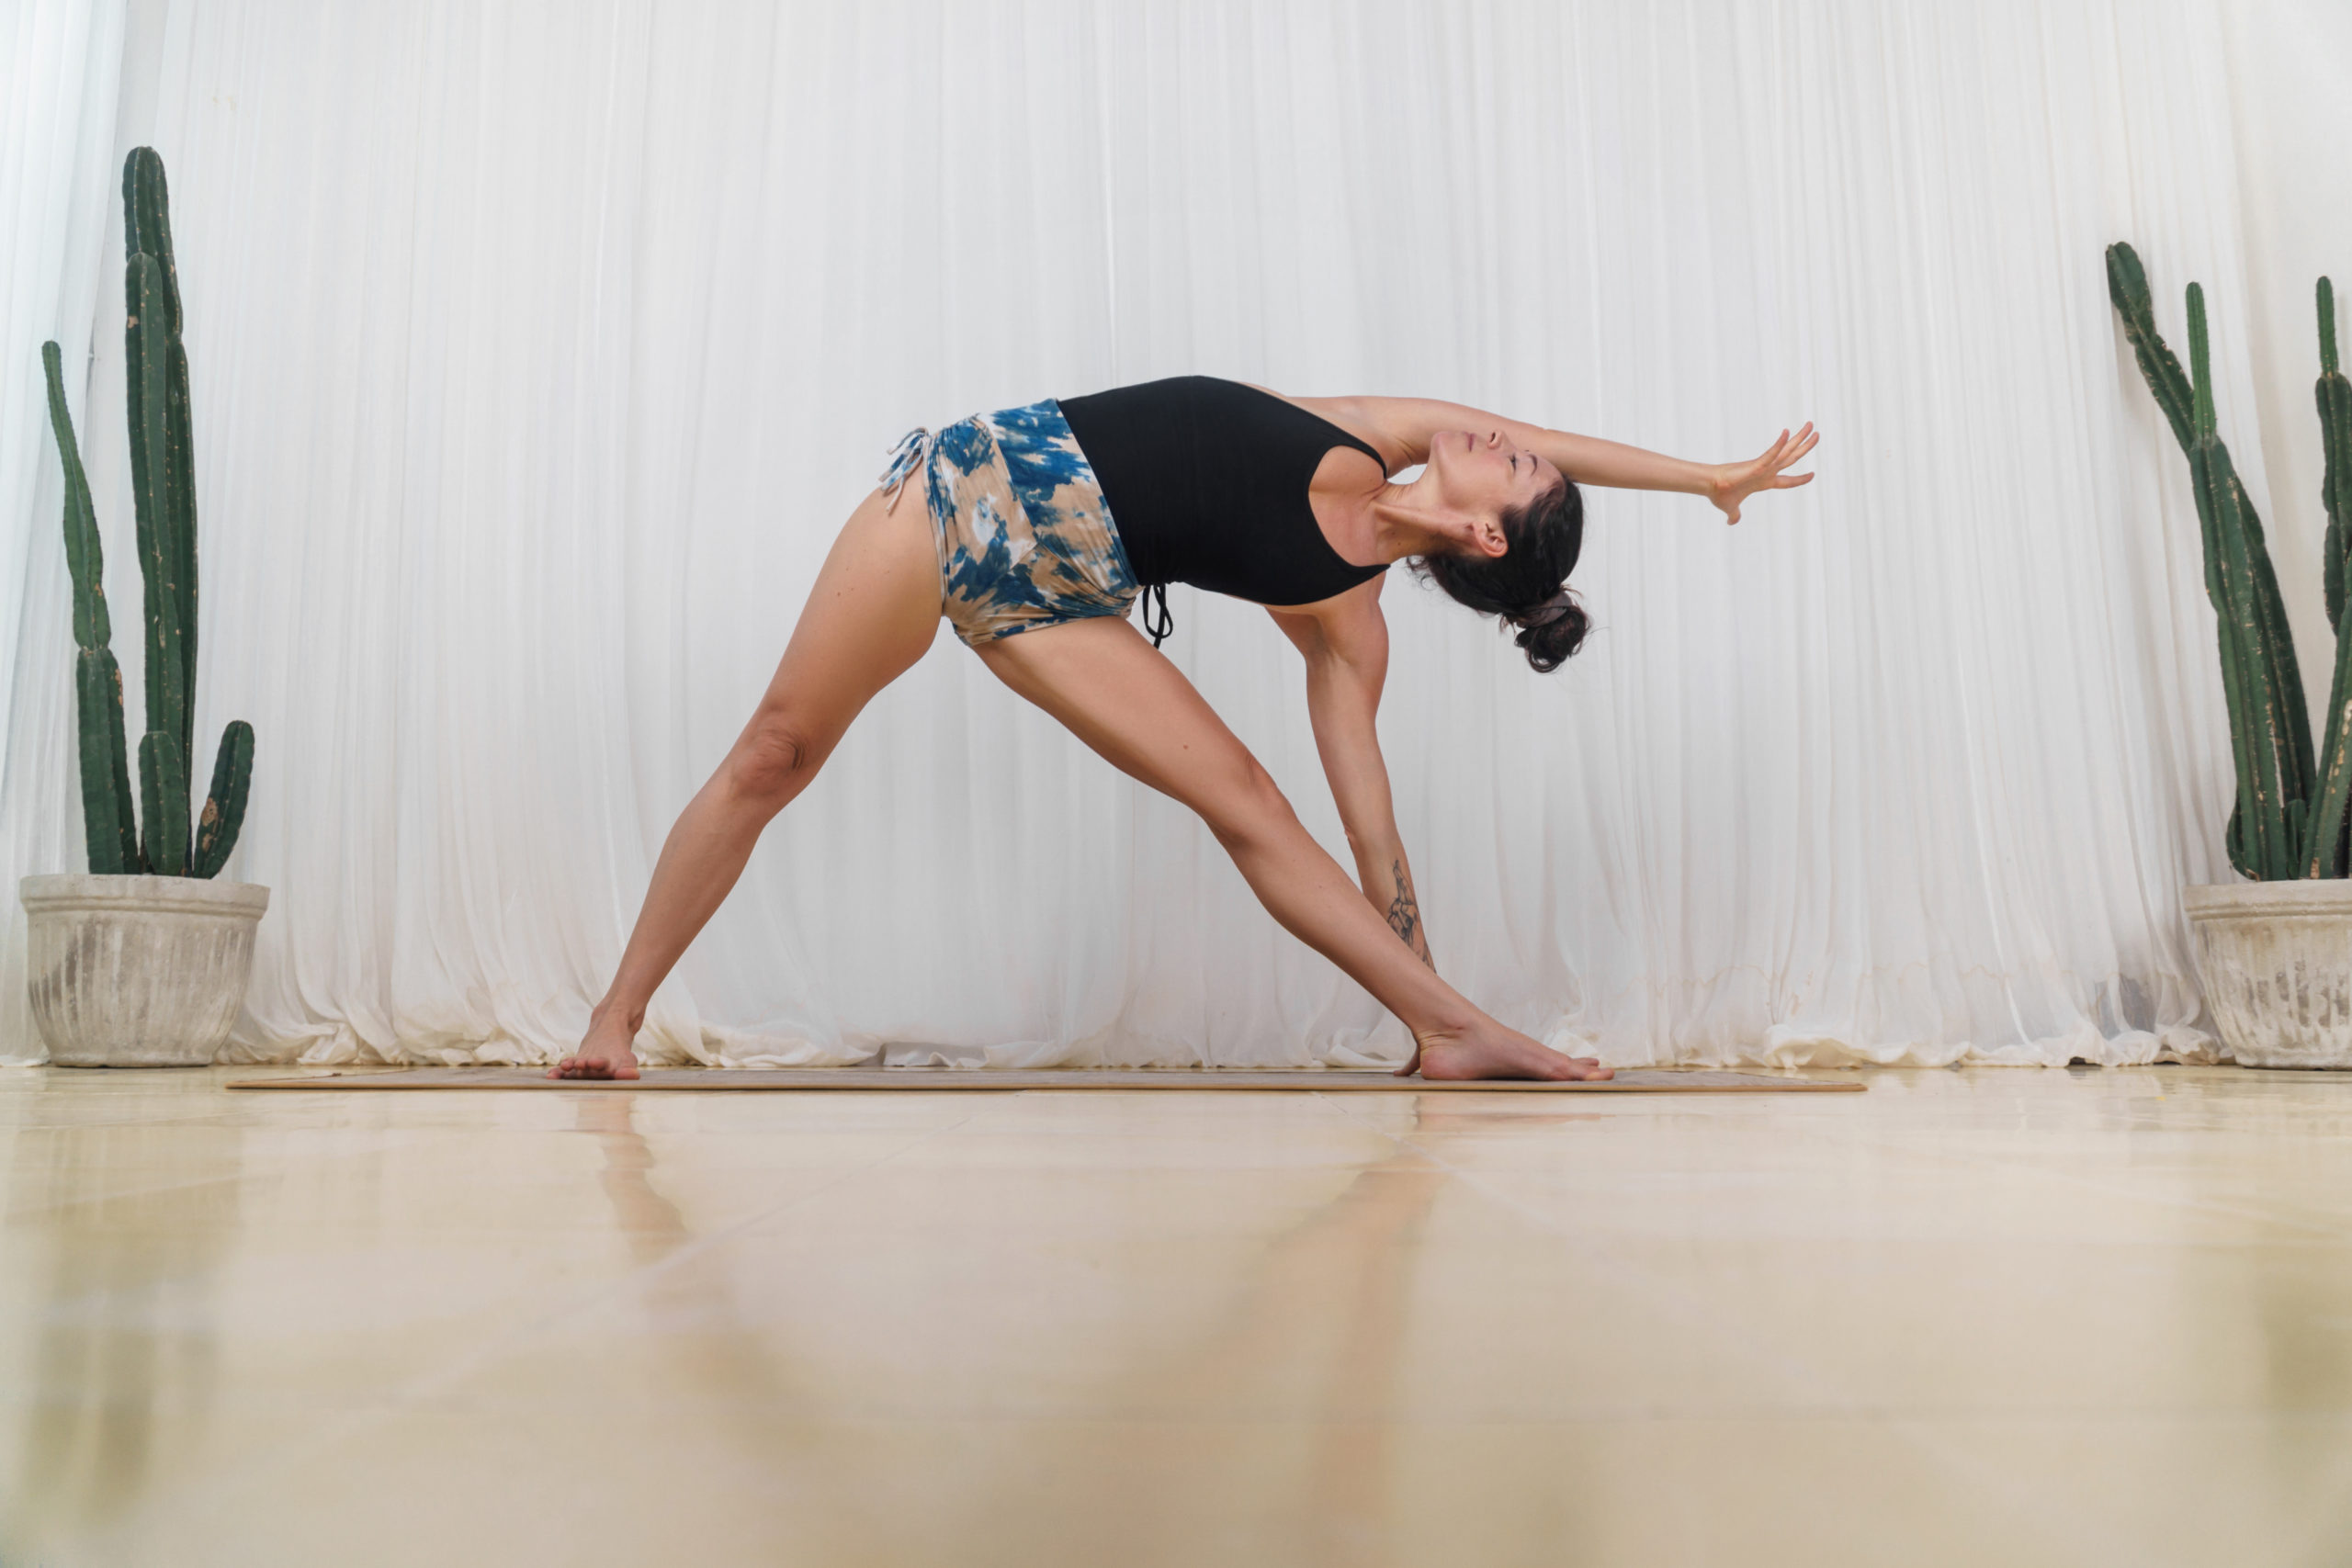 Advanced Yoga Poses: How Your Mindset Influences Your Practice